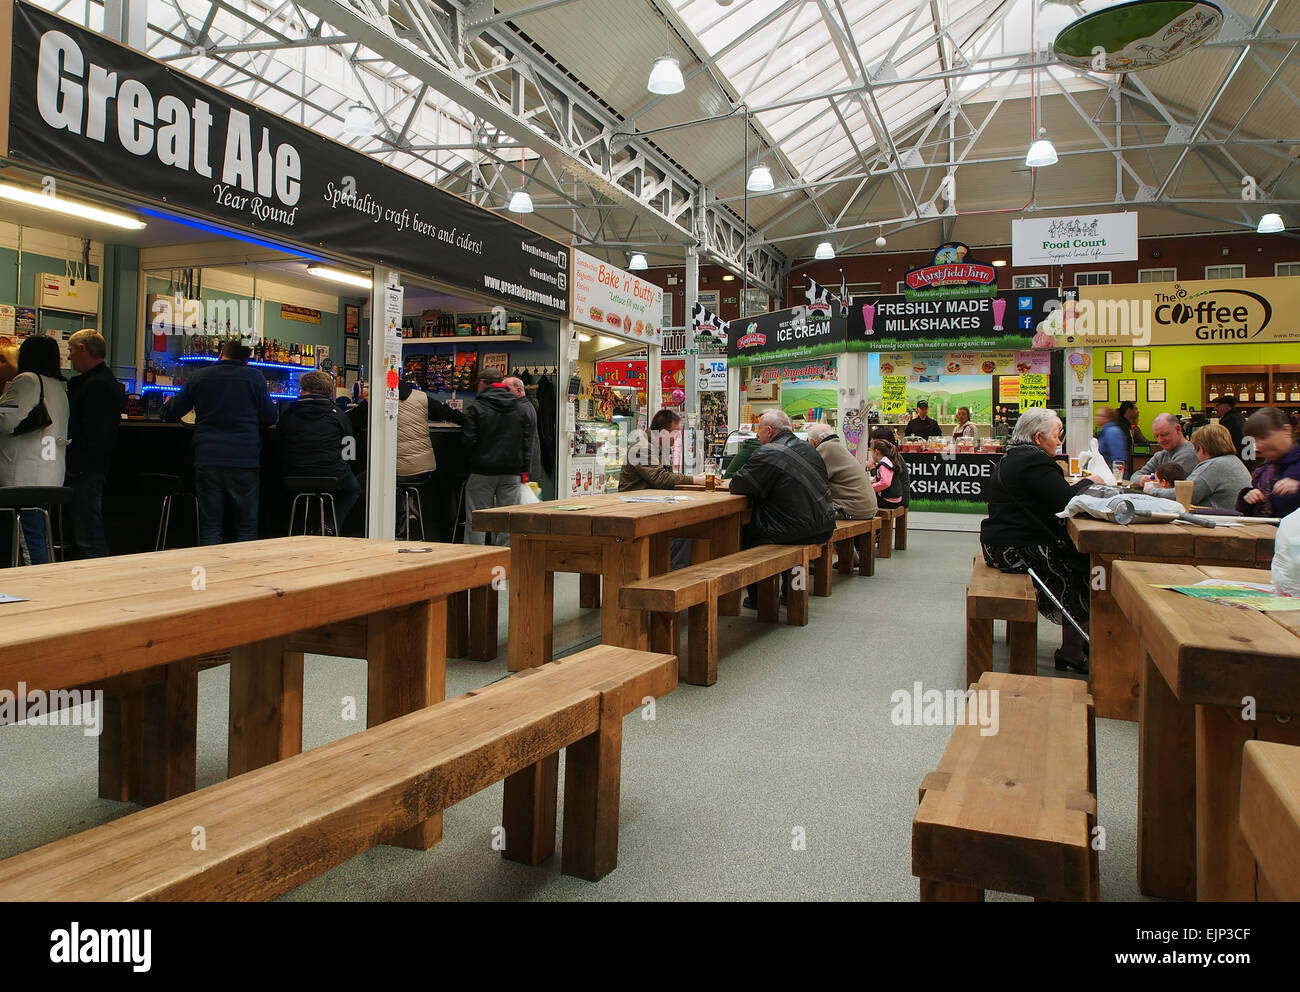 Refreshment area in Bolton indoor market, in Lancashire, UK, showing the various bars and cafes with seating area in the centre. Stock Photo